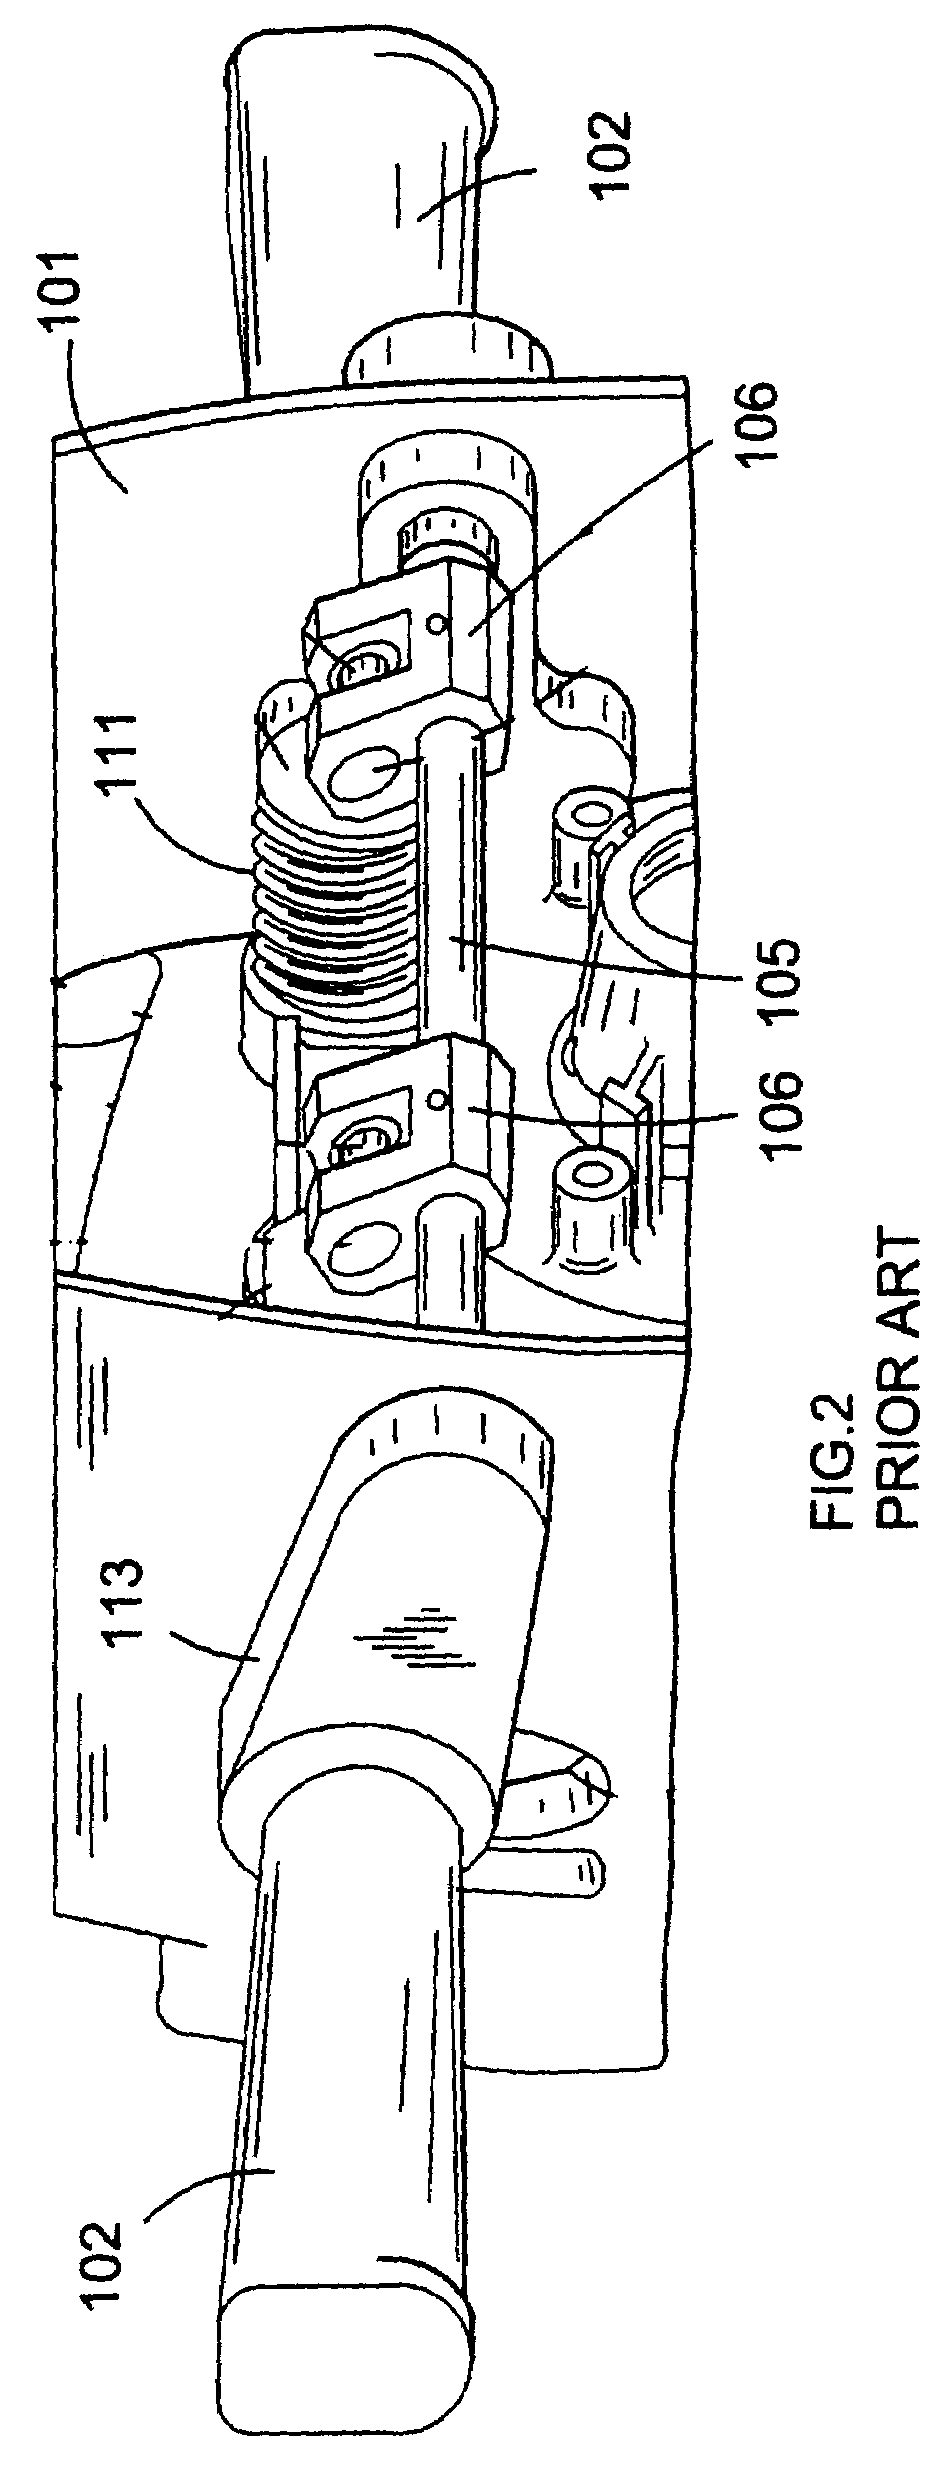 Vibration reduction apparatus for power tool and power tool incorporating such apparatus